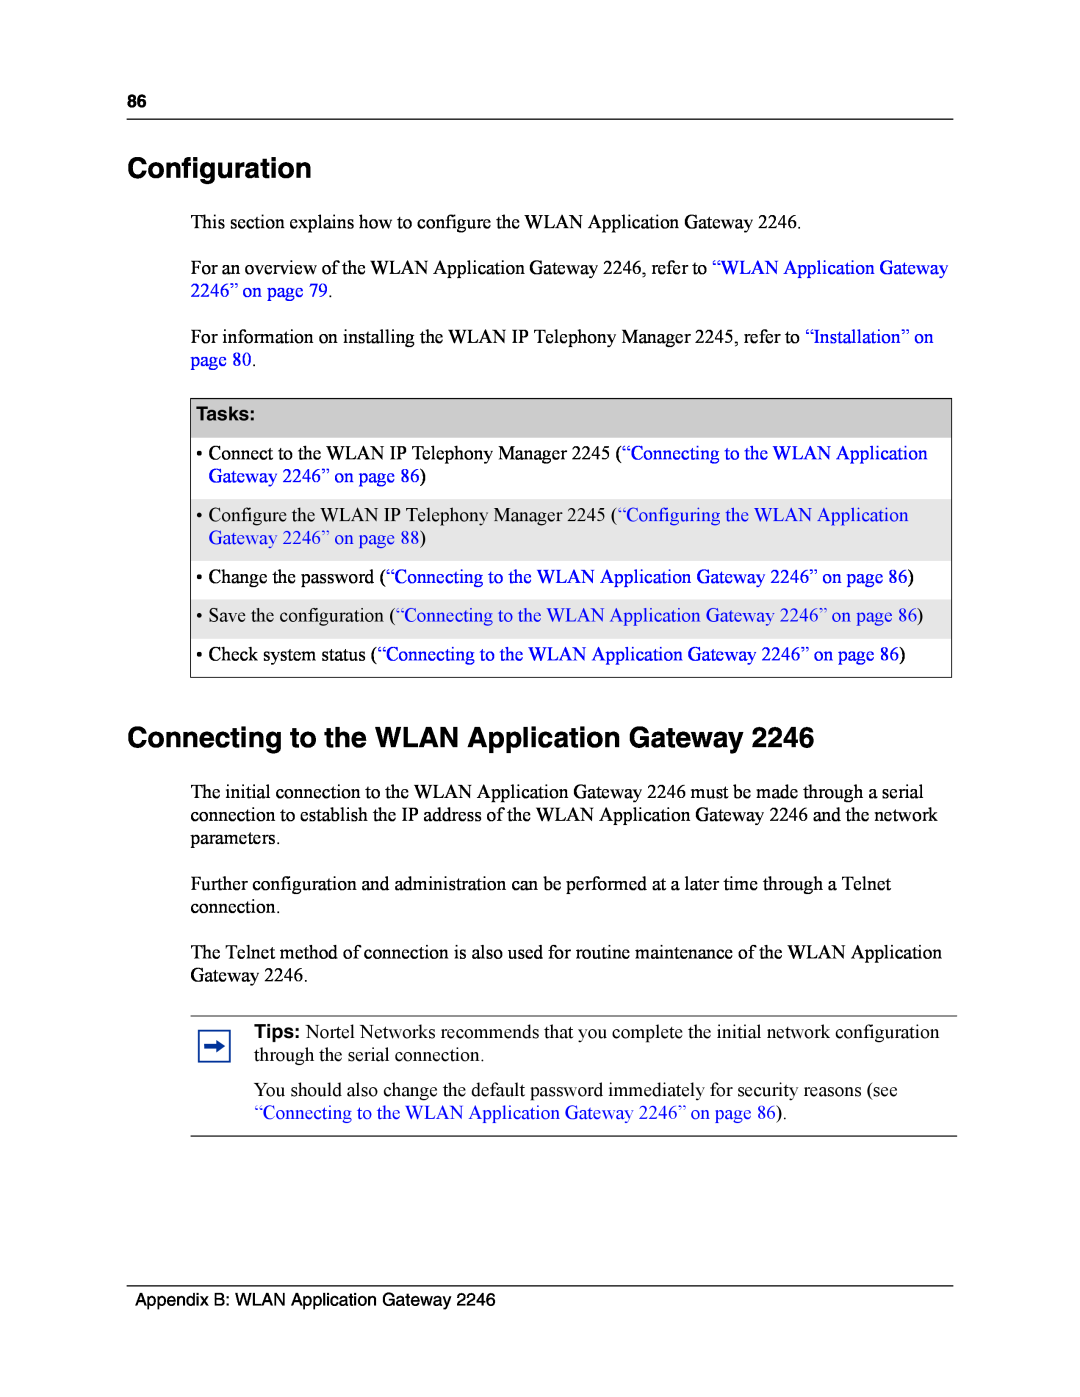 Nortel Networks MOG7xx, MOG6xx manual Configuration, Connecting to the WLAN Application Gateway, Tasks 